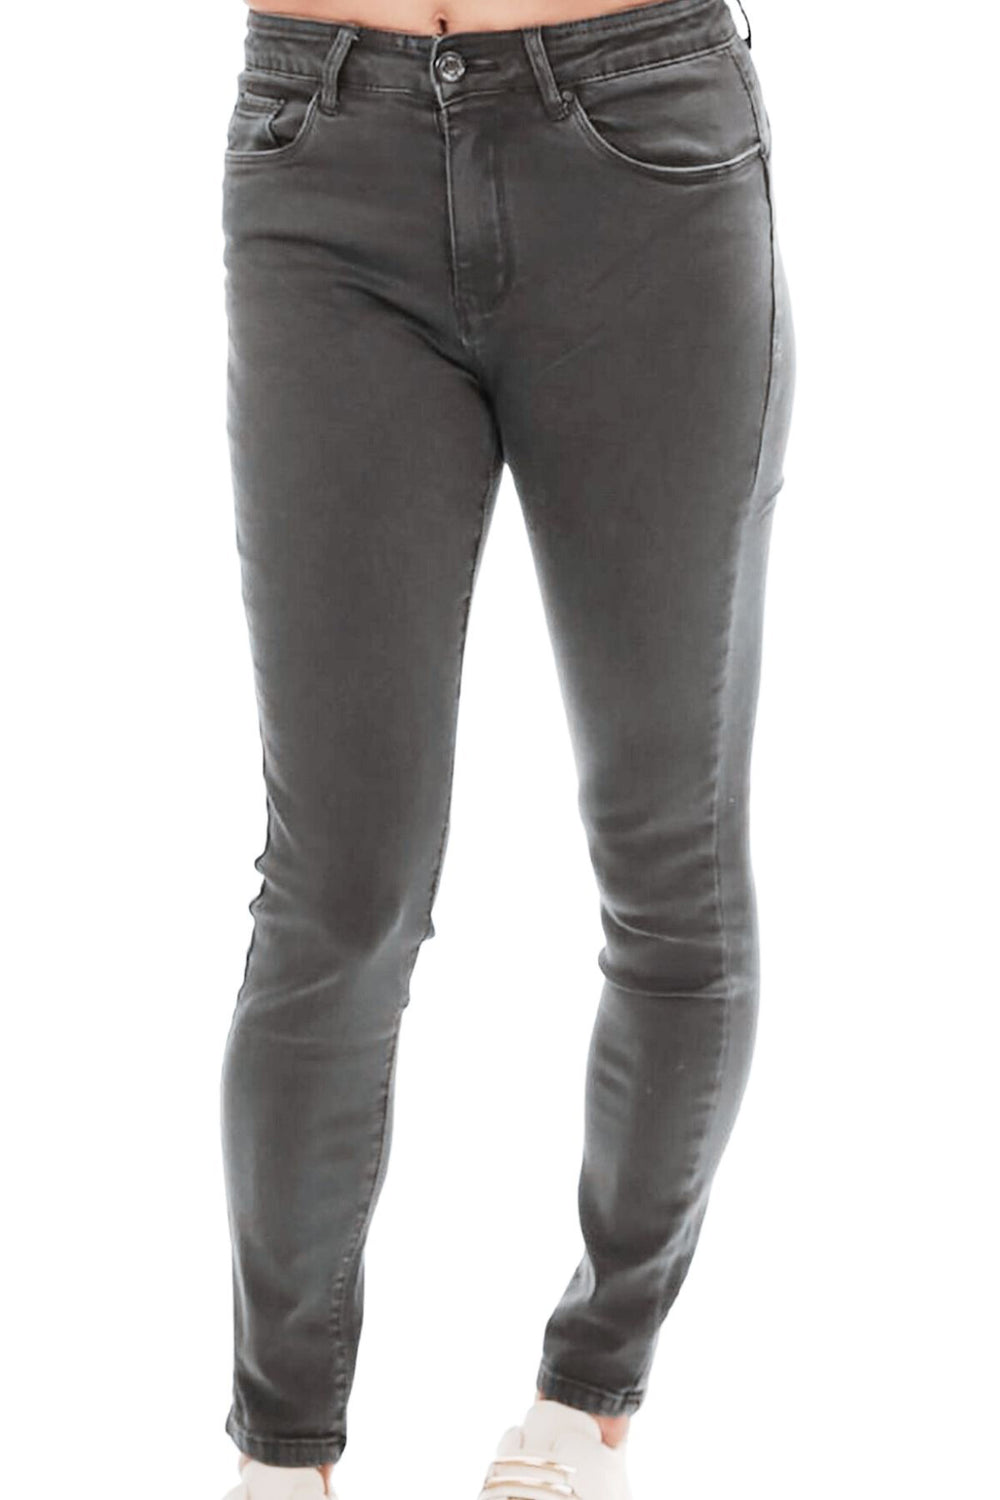 Ana & Lucy high rise jeans in graphite, sold and shipped from Pizazz Boutique Nelson Bay women's dresses online Australia